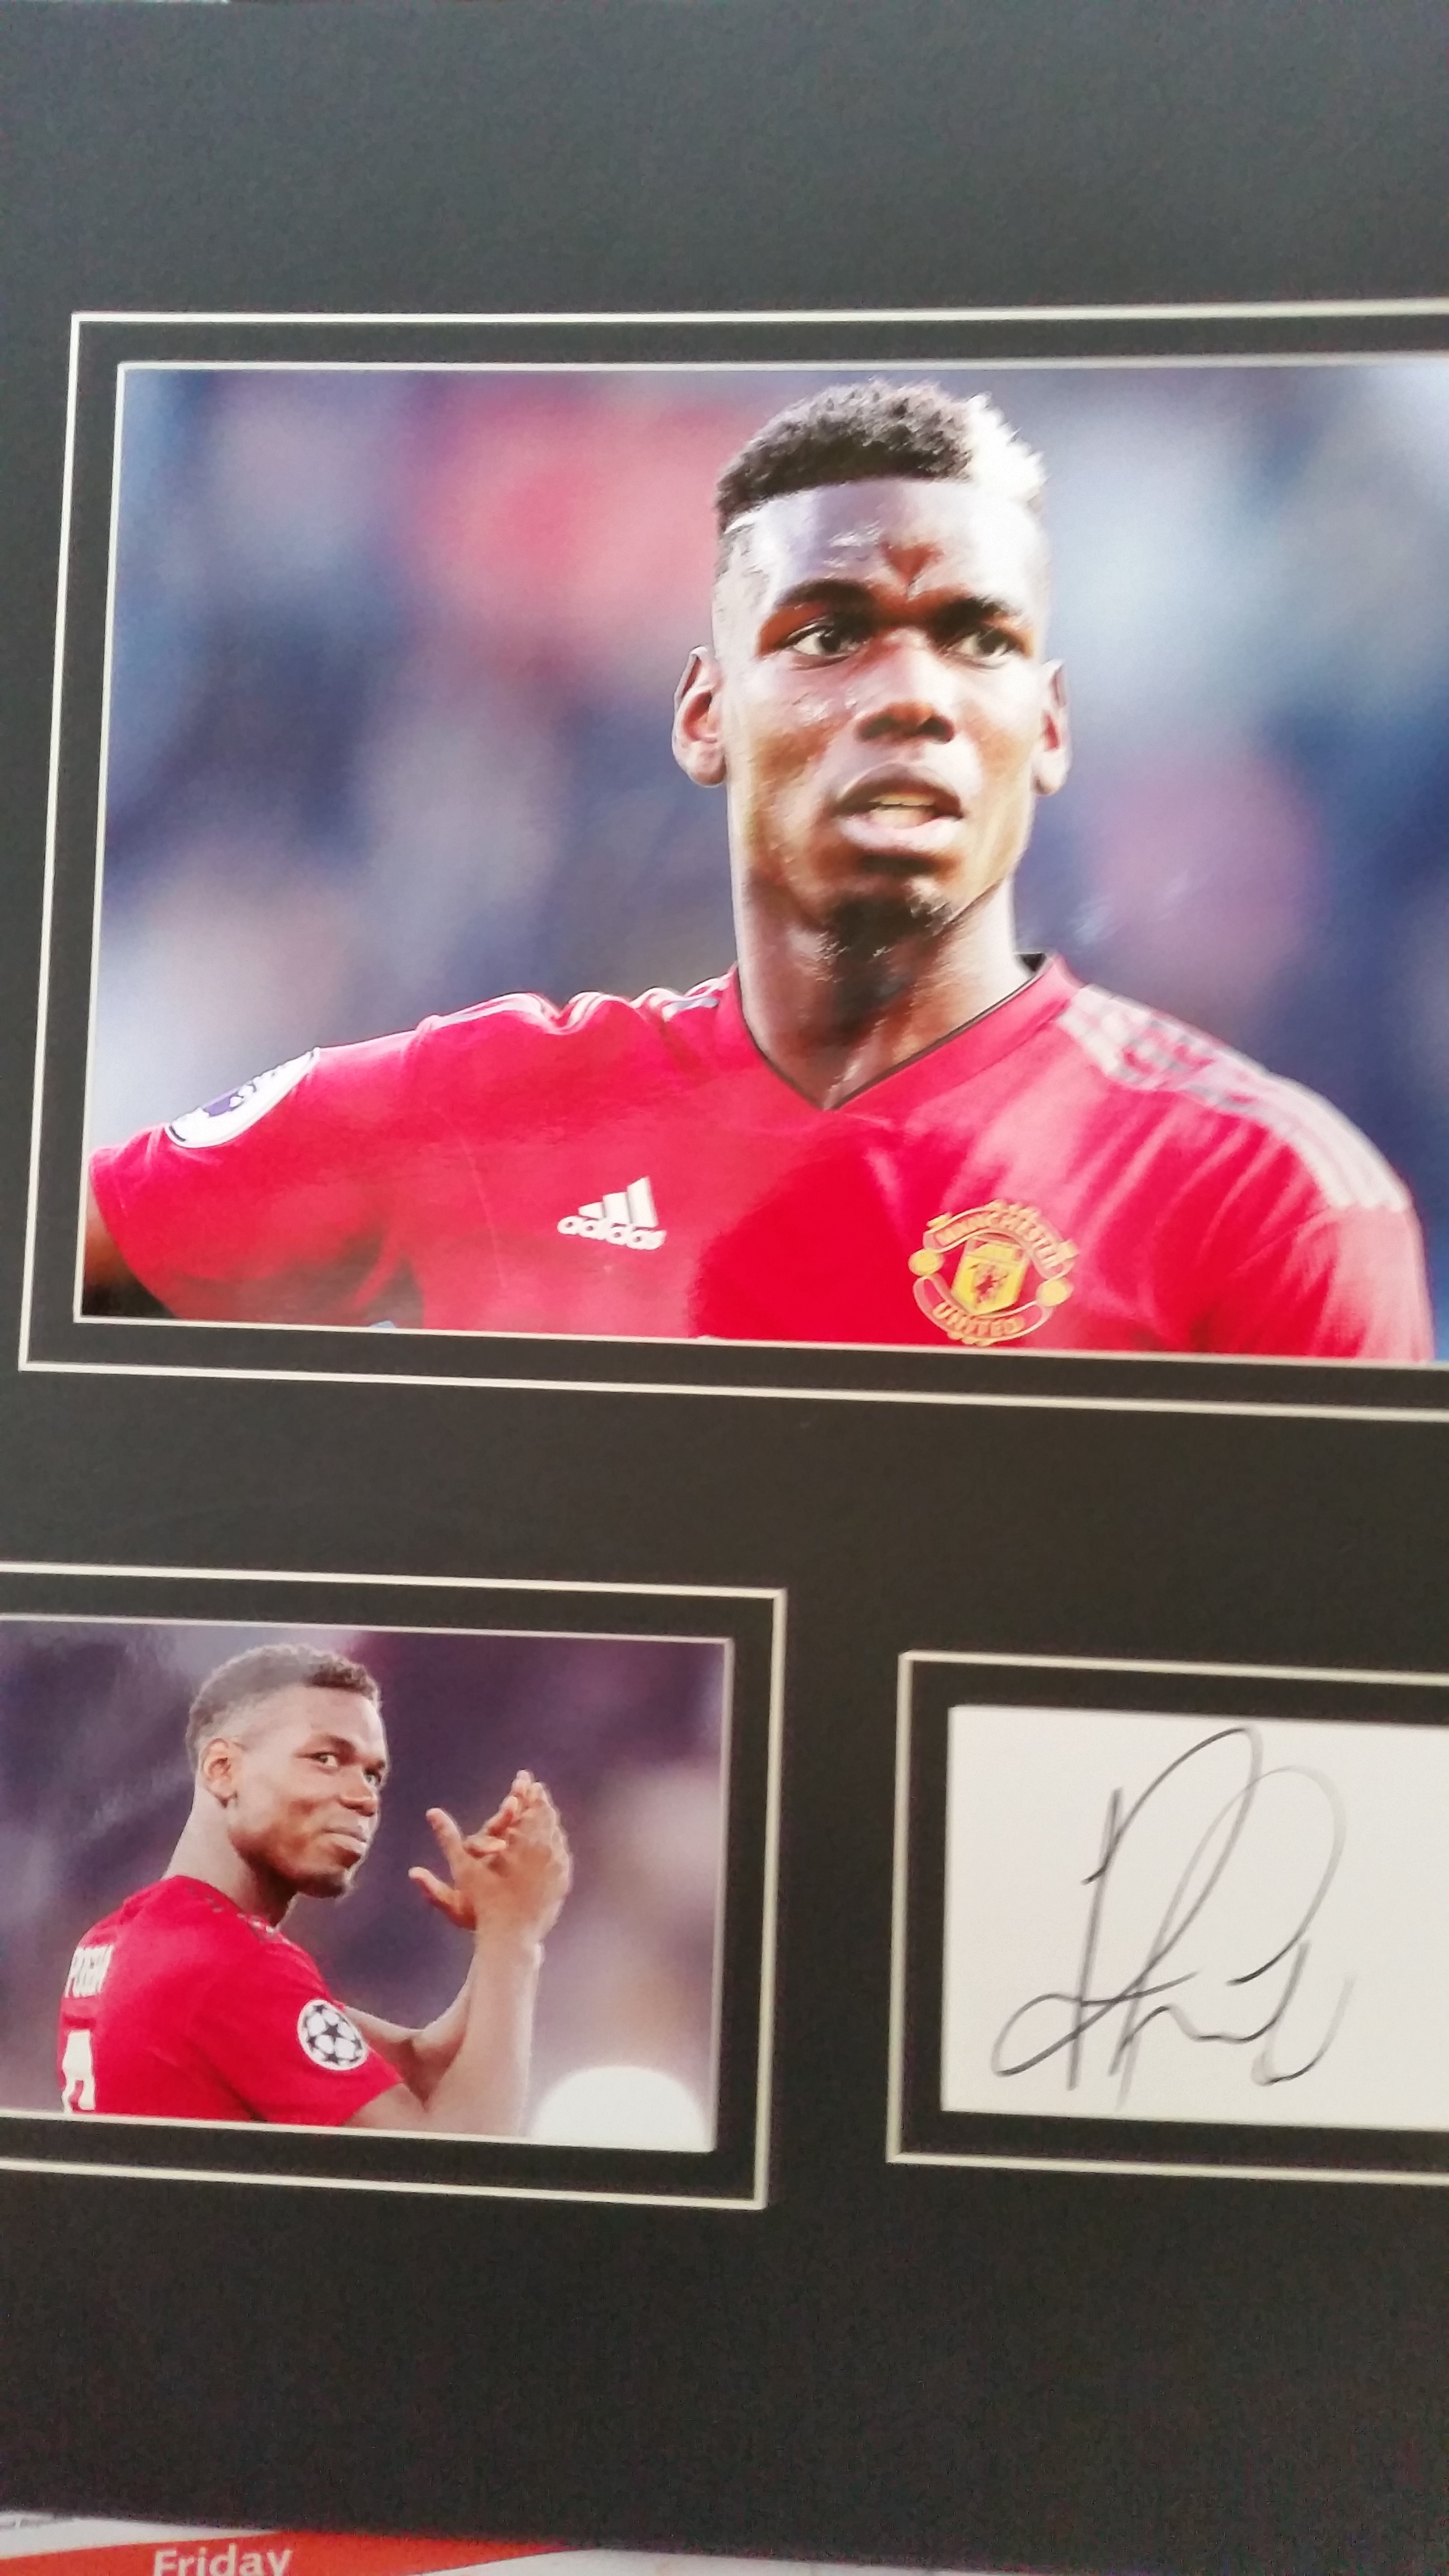 FOOTBALL, Manchester United presentation piece by Paul Pogba, inc. signed white page (hurried